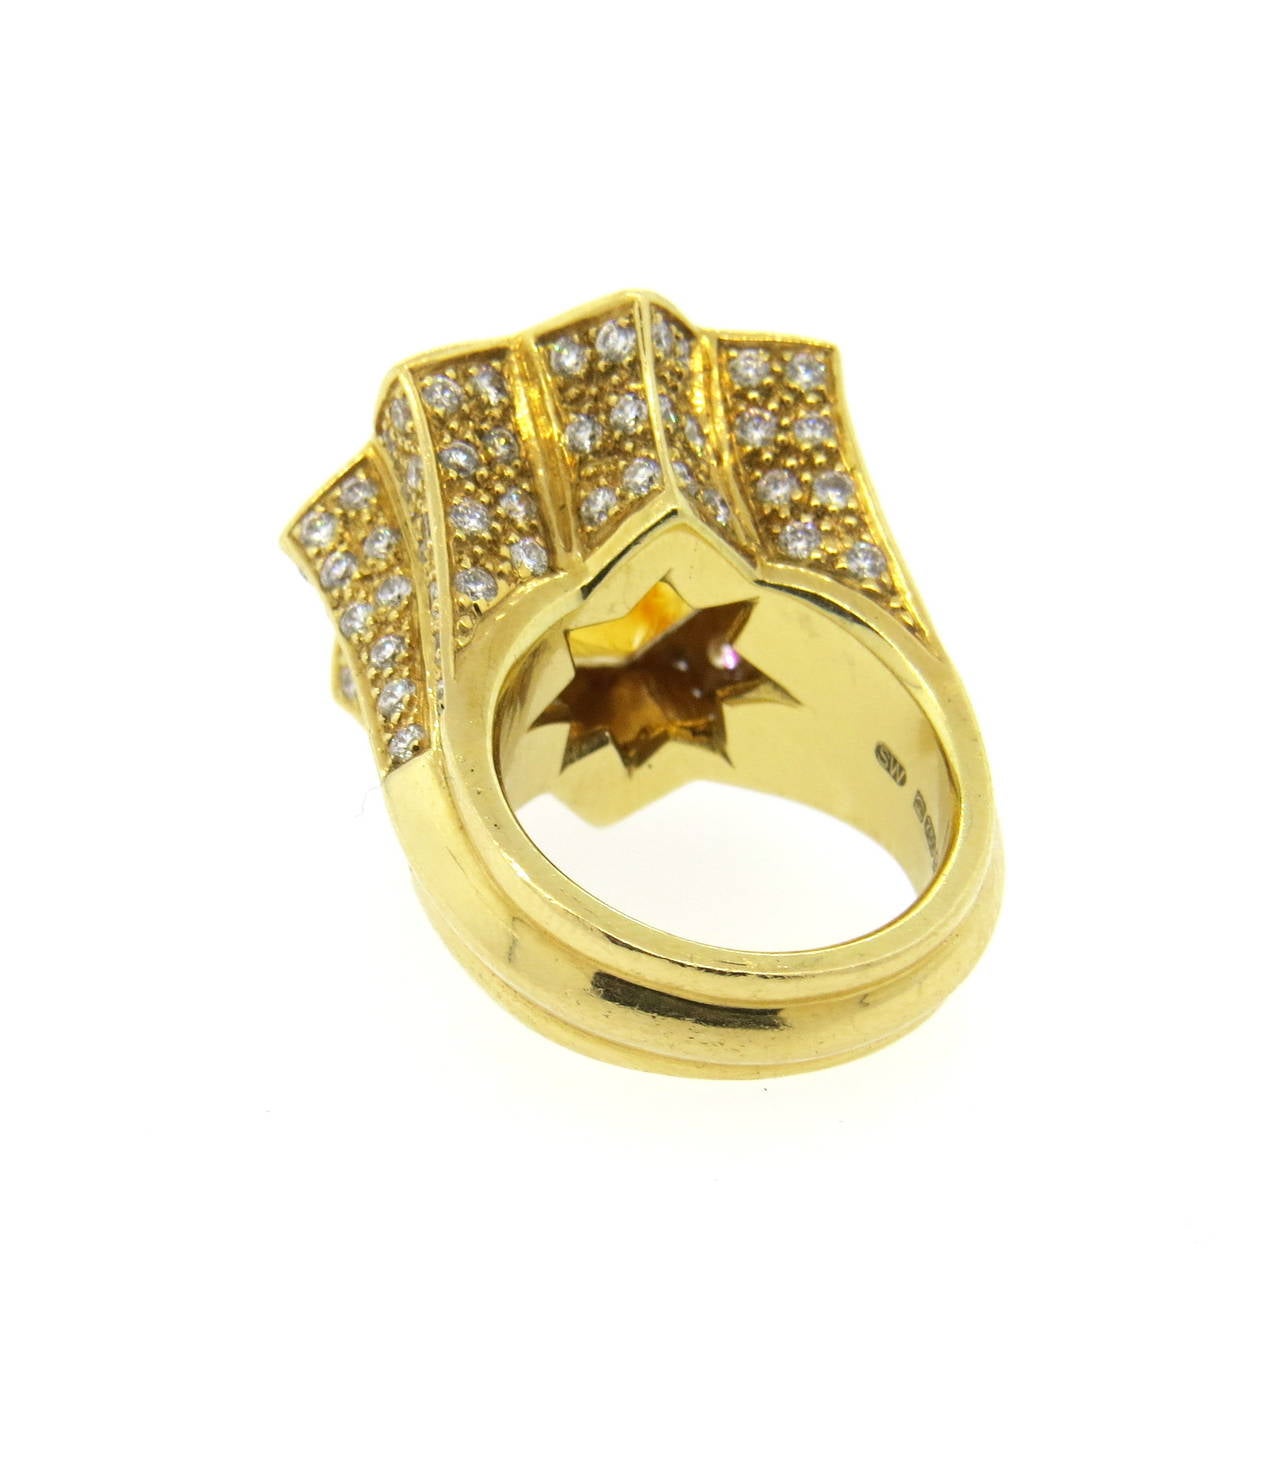 Large 18k yellow gold ring, crafted by Stephen Webster, featuring 16mm x 16mm citrine, surrounded with approximately 1.50ctw in diamonds. Ring is a size 5, ring top is 23mm x 23mm. Marked SW, 750 and with English marks. Weight of the piece - 22.1